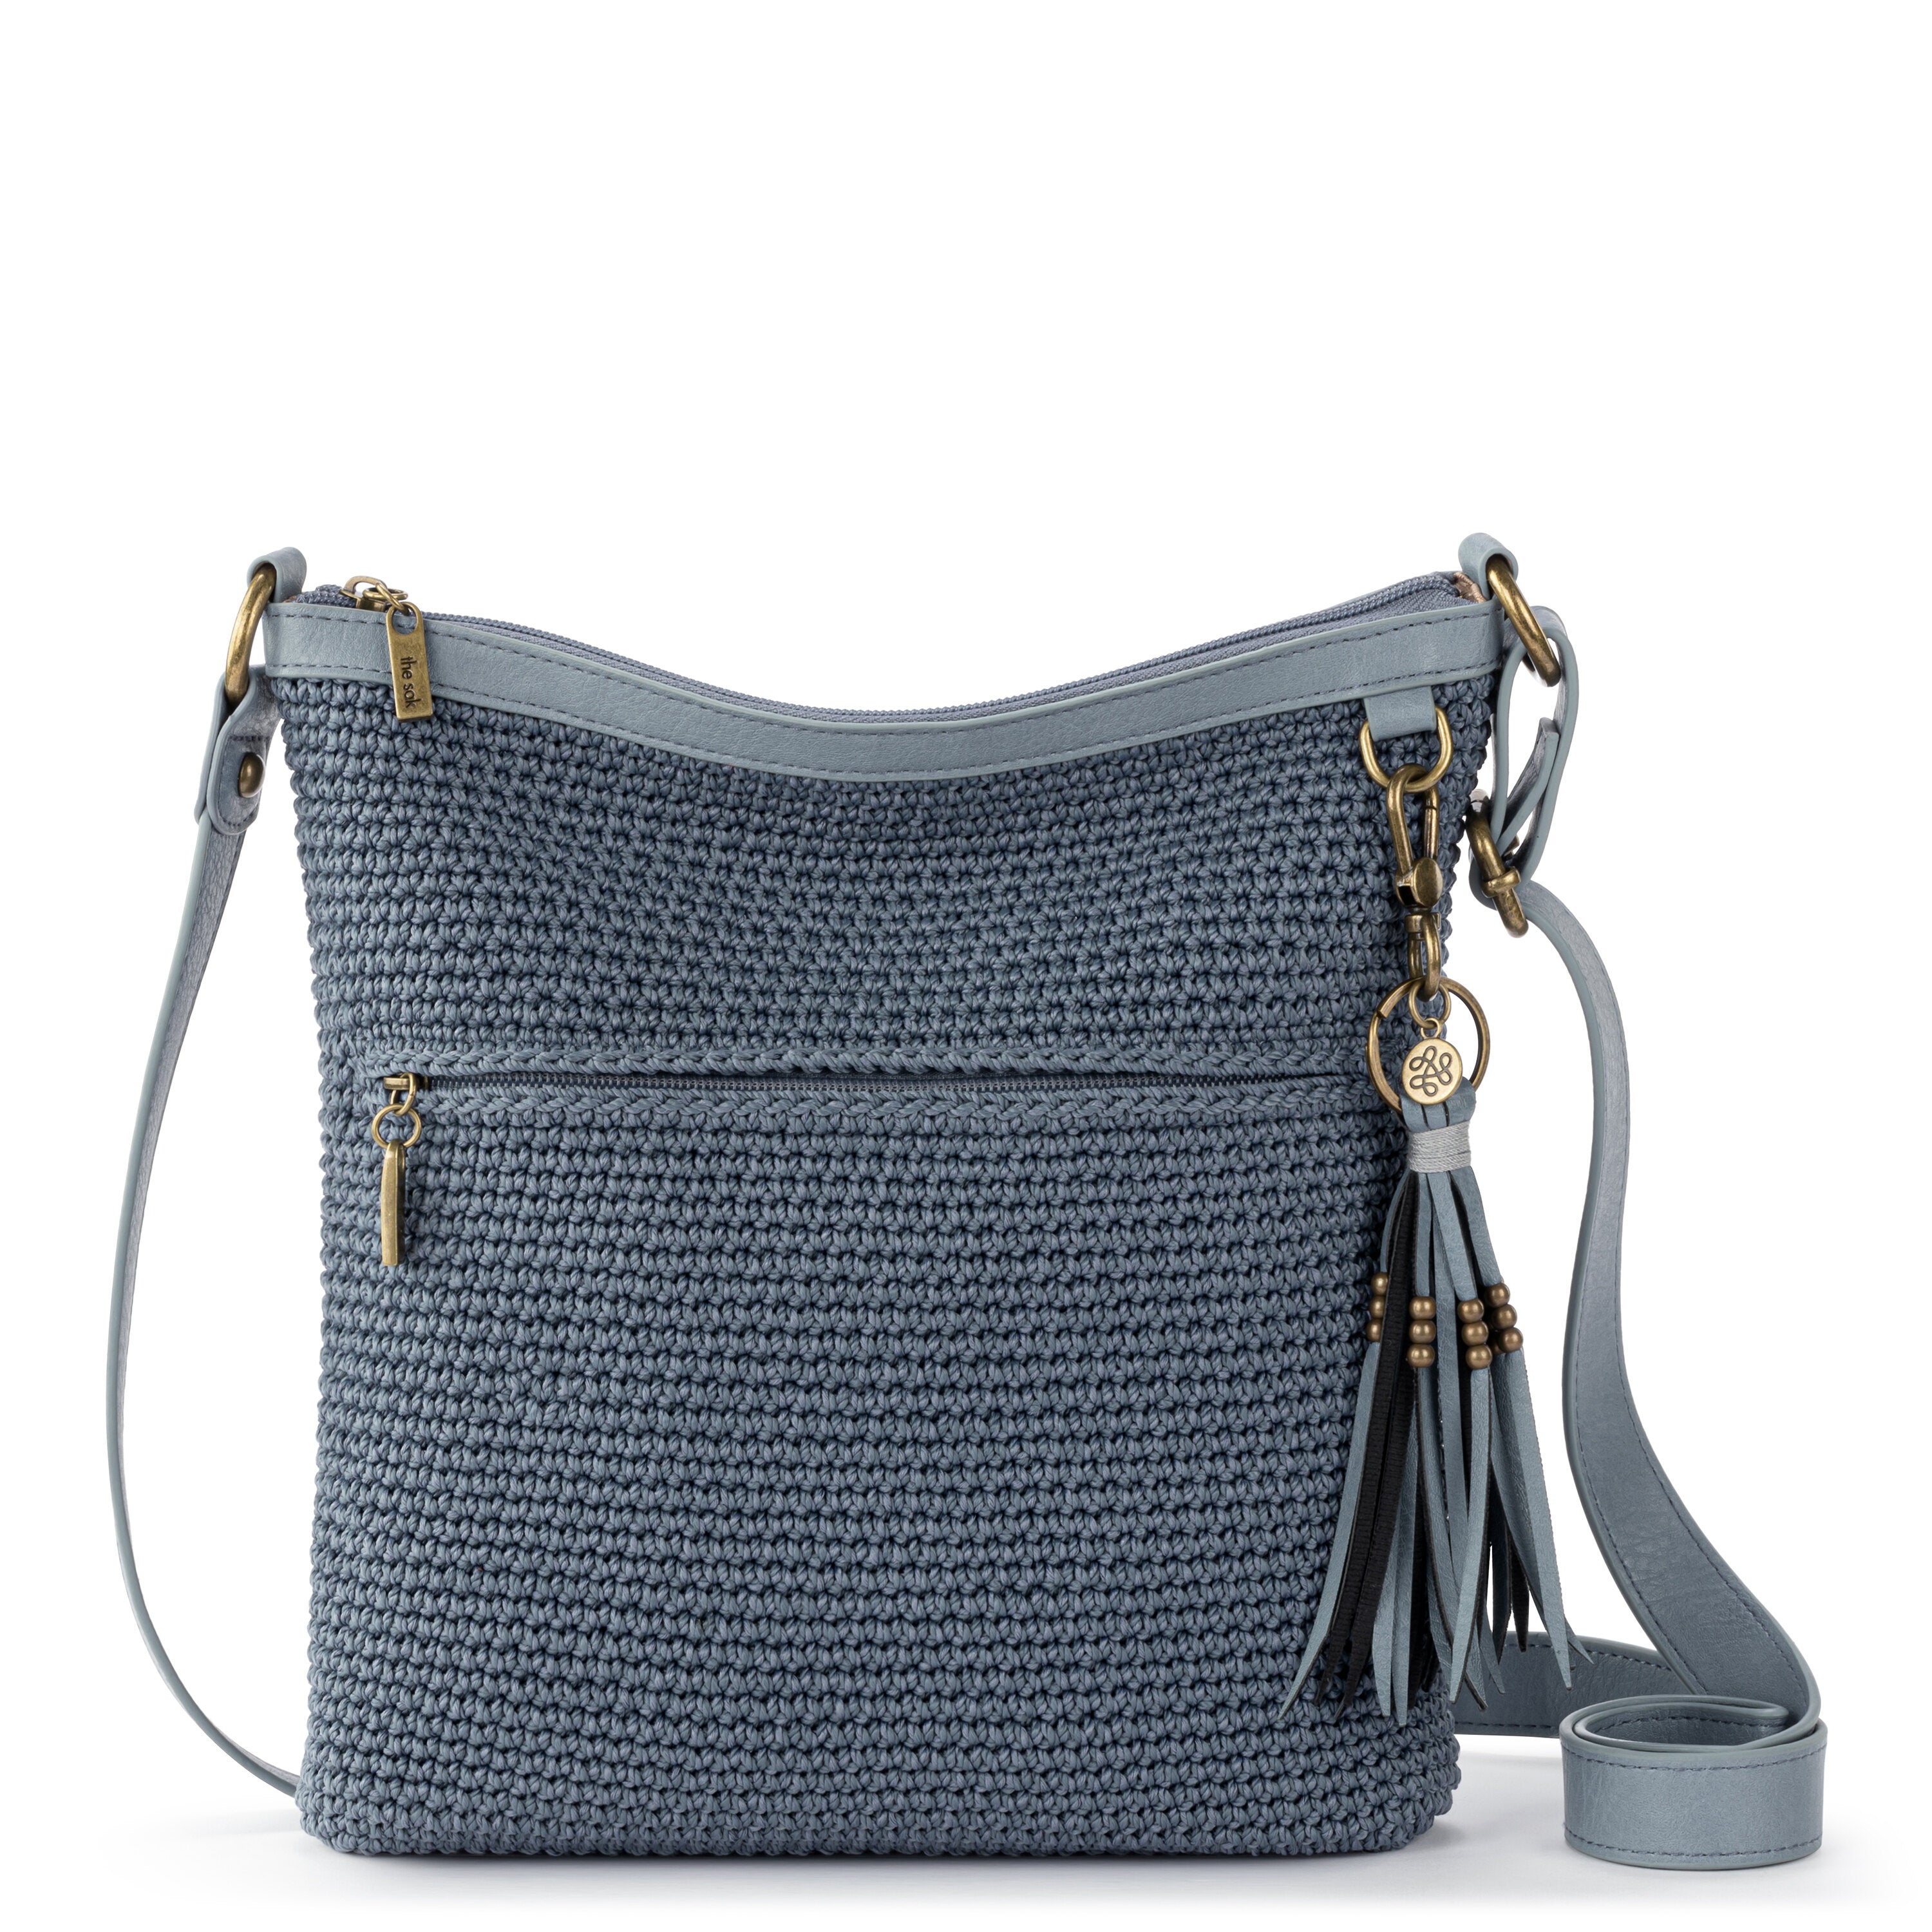 The Sak: See what's new in crossbody, tote and hobo bags - mlive.com